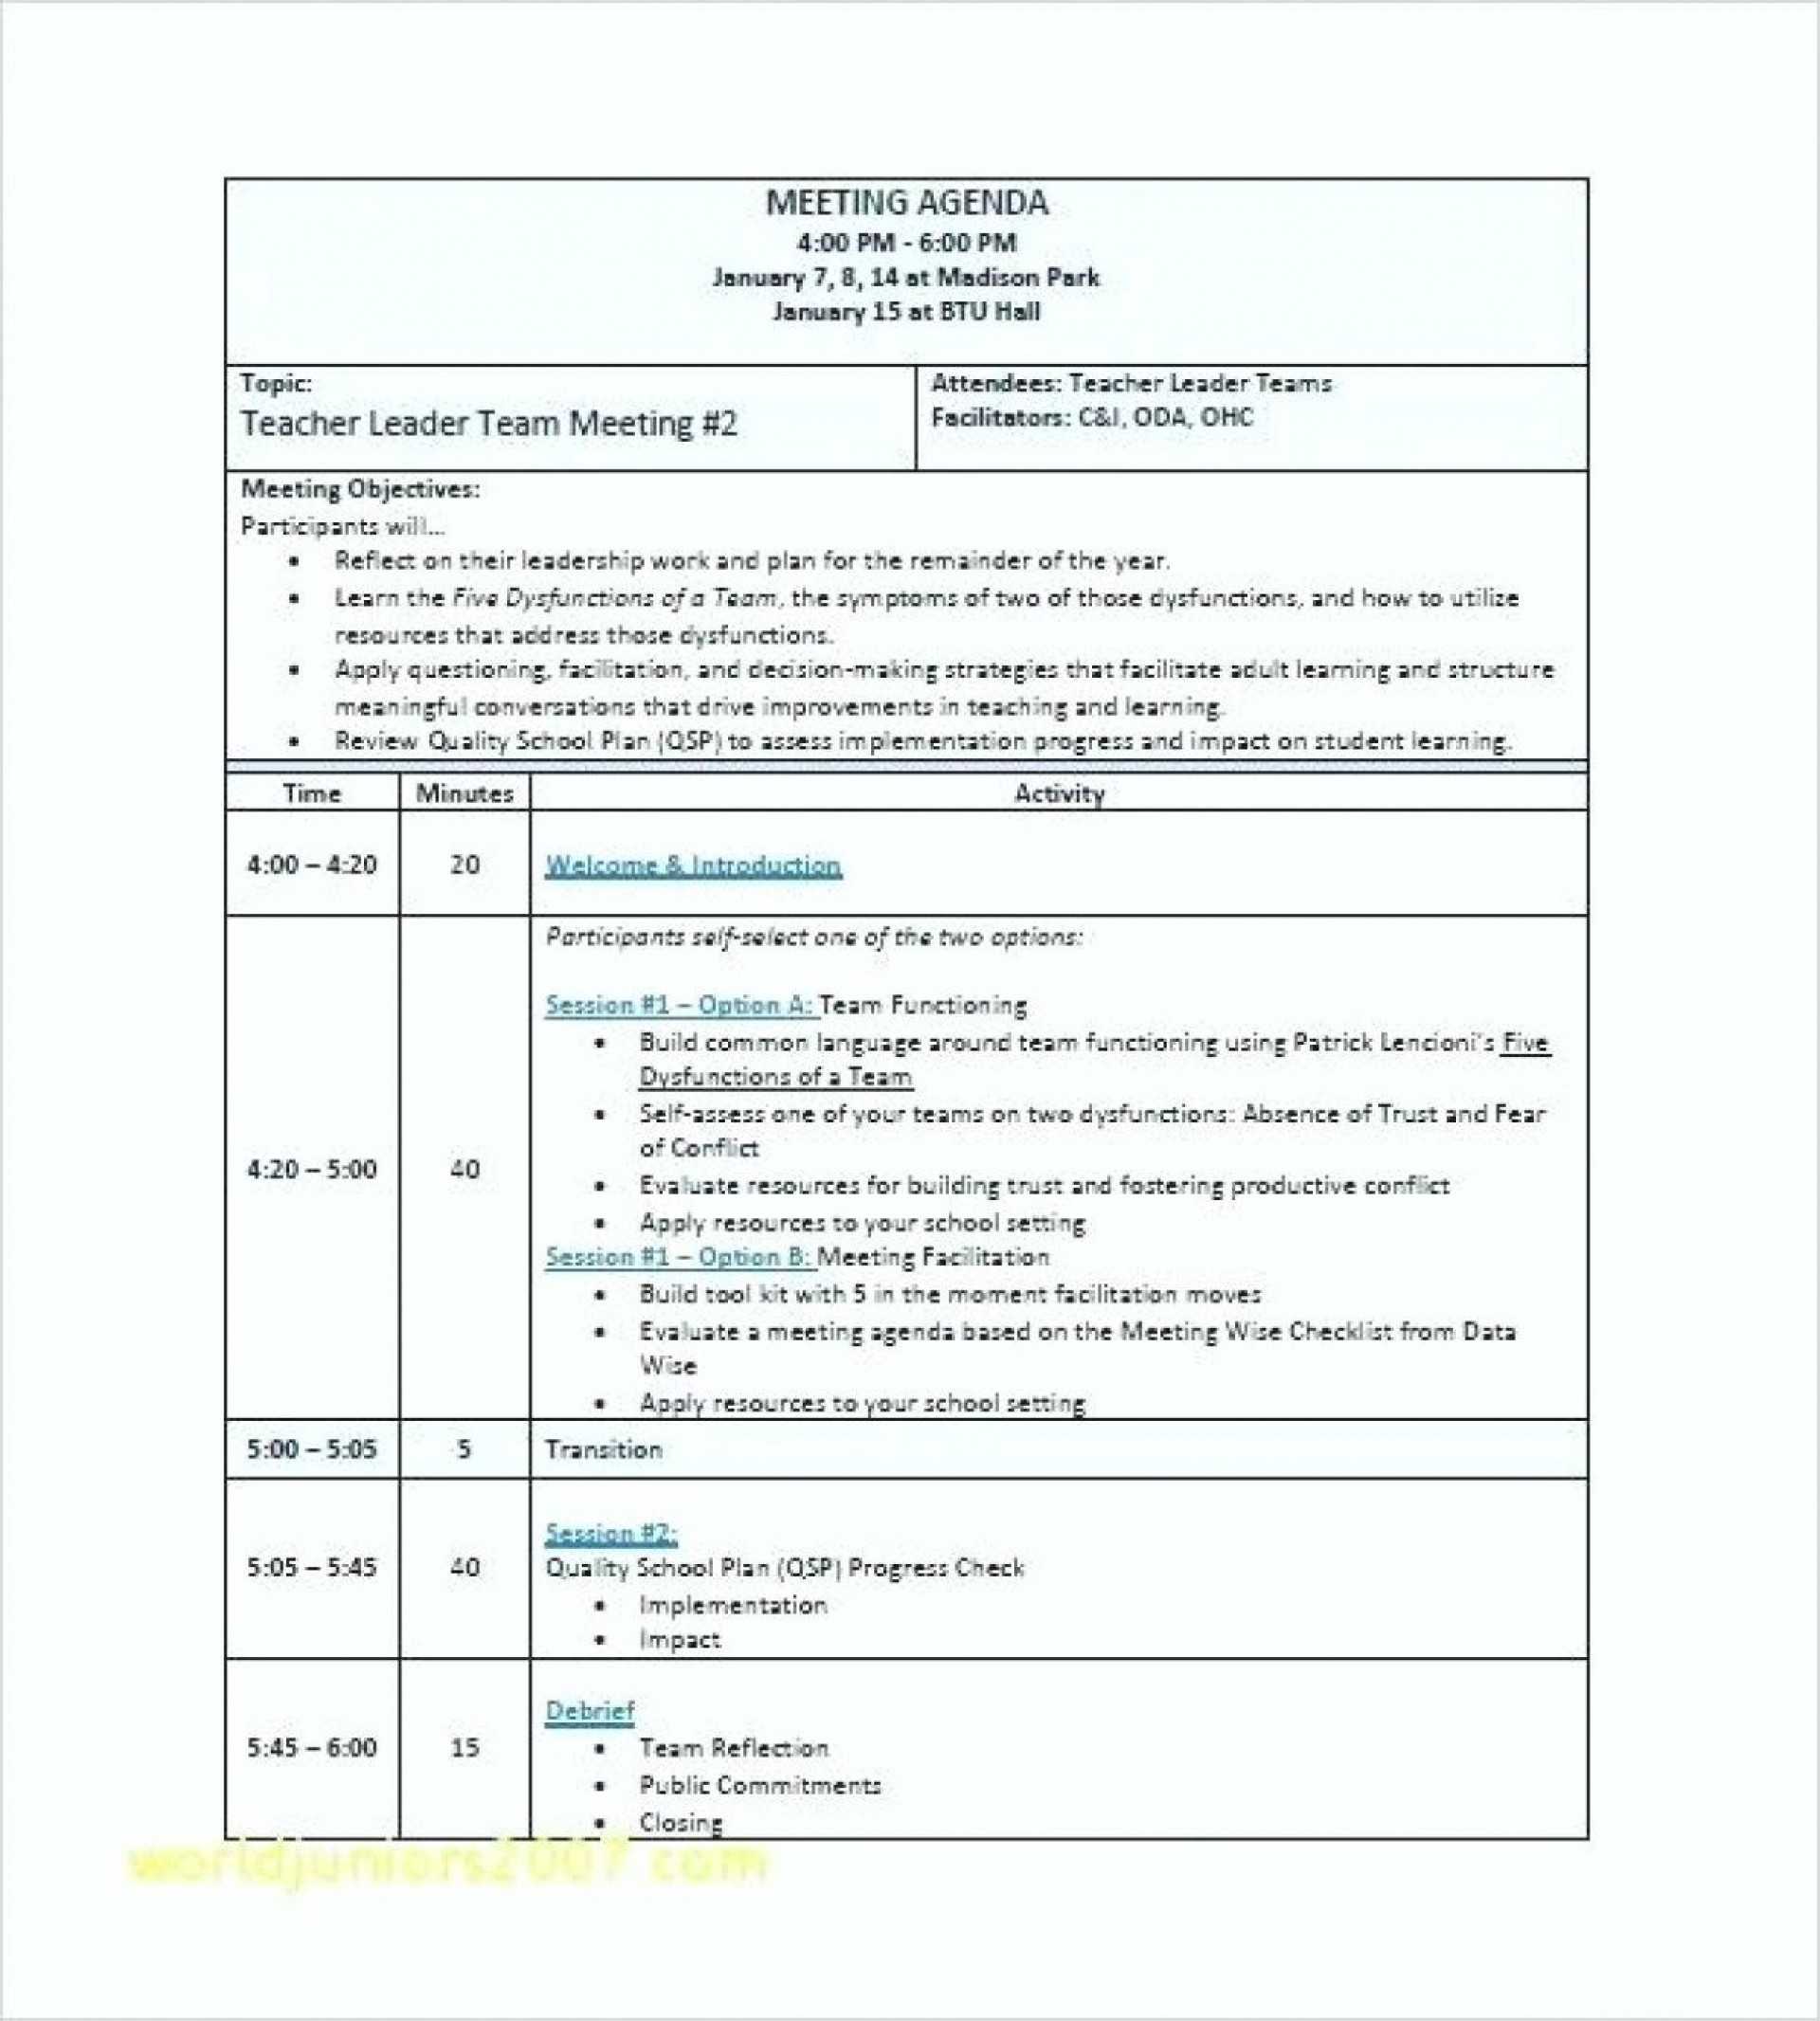 12 13 Word Agenda Vorlage Für Meetings | Ithacar With Free Meeting Agenda Templates For Word